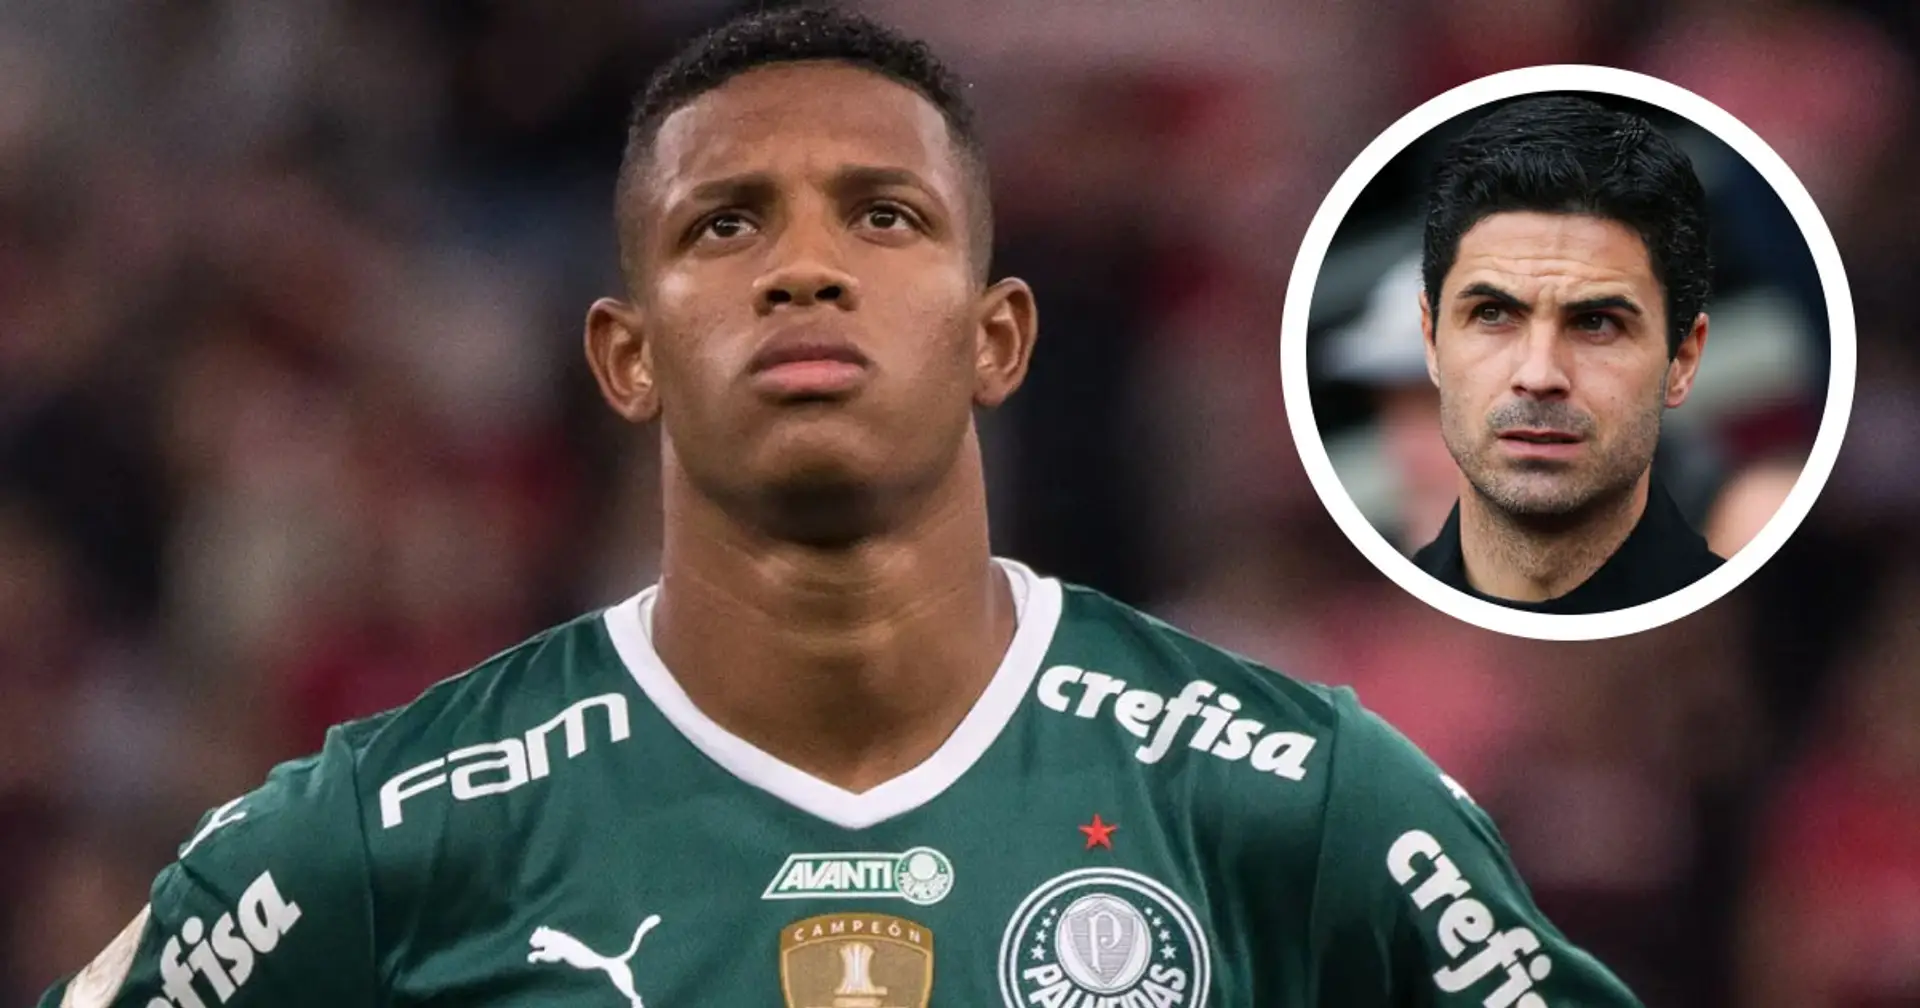 Arsenal 'should make bid' for signing Palmeiras midfielder Danilo  - possible fee revealed (reliability: 3 stars)